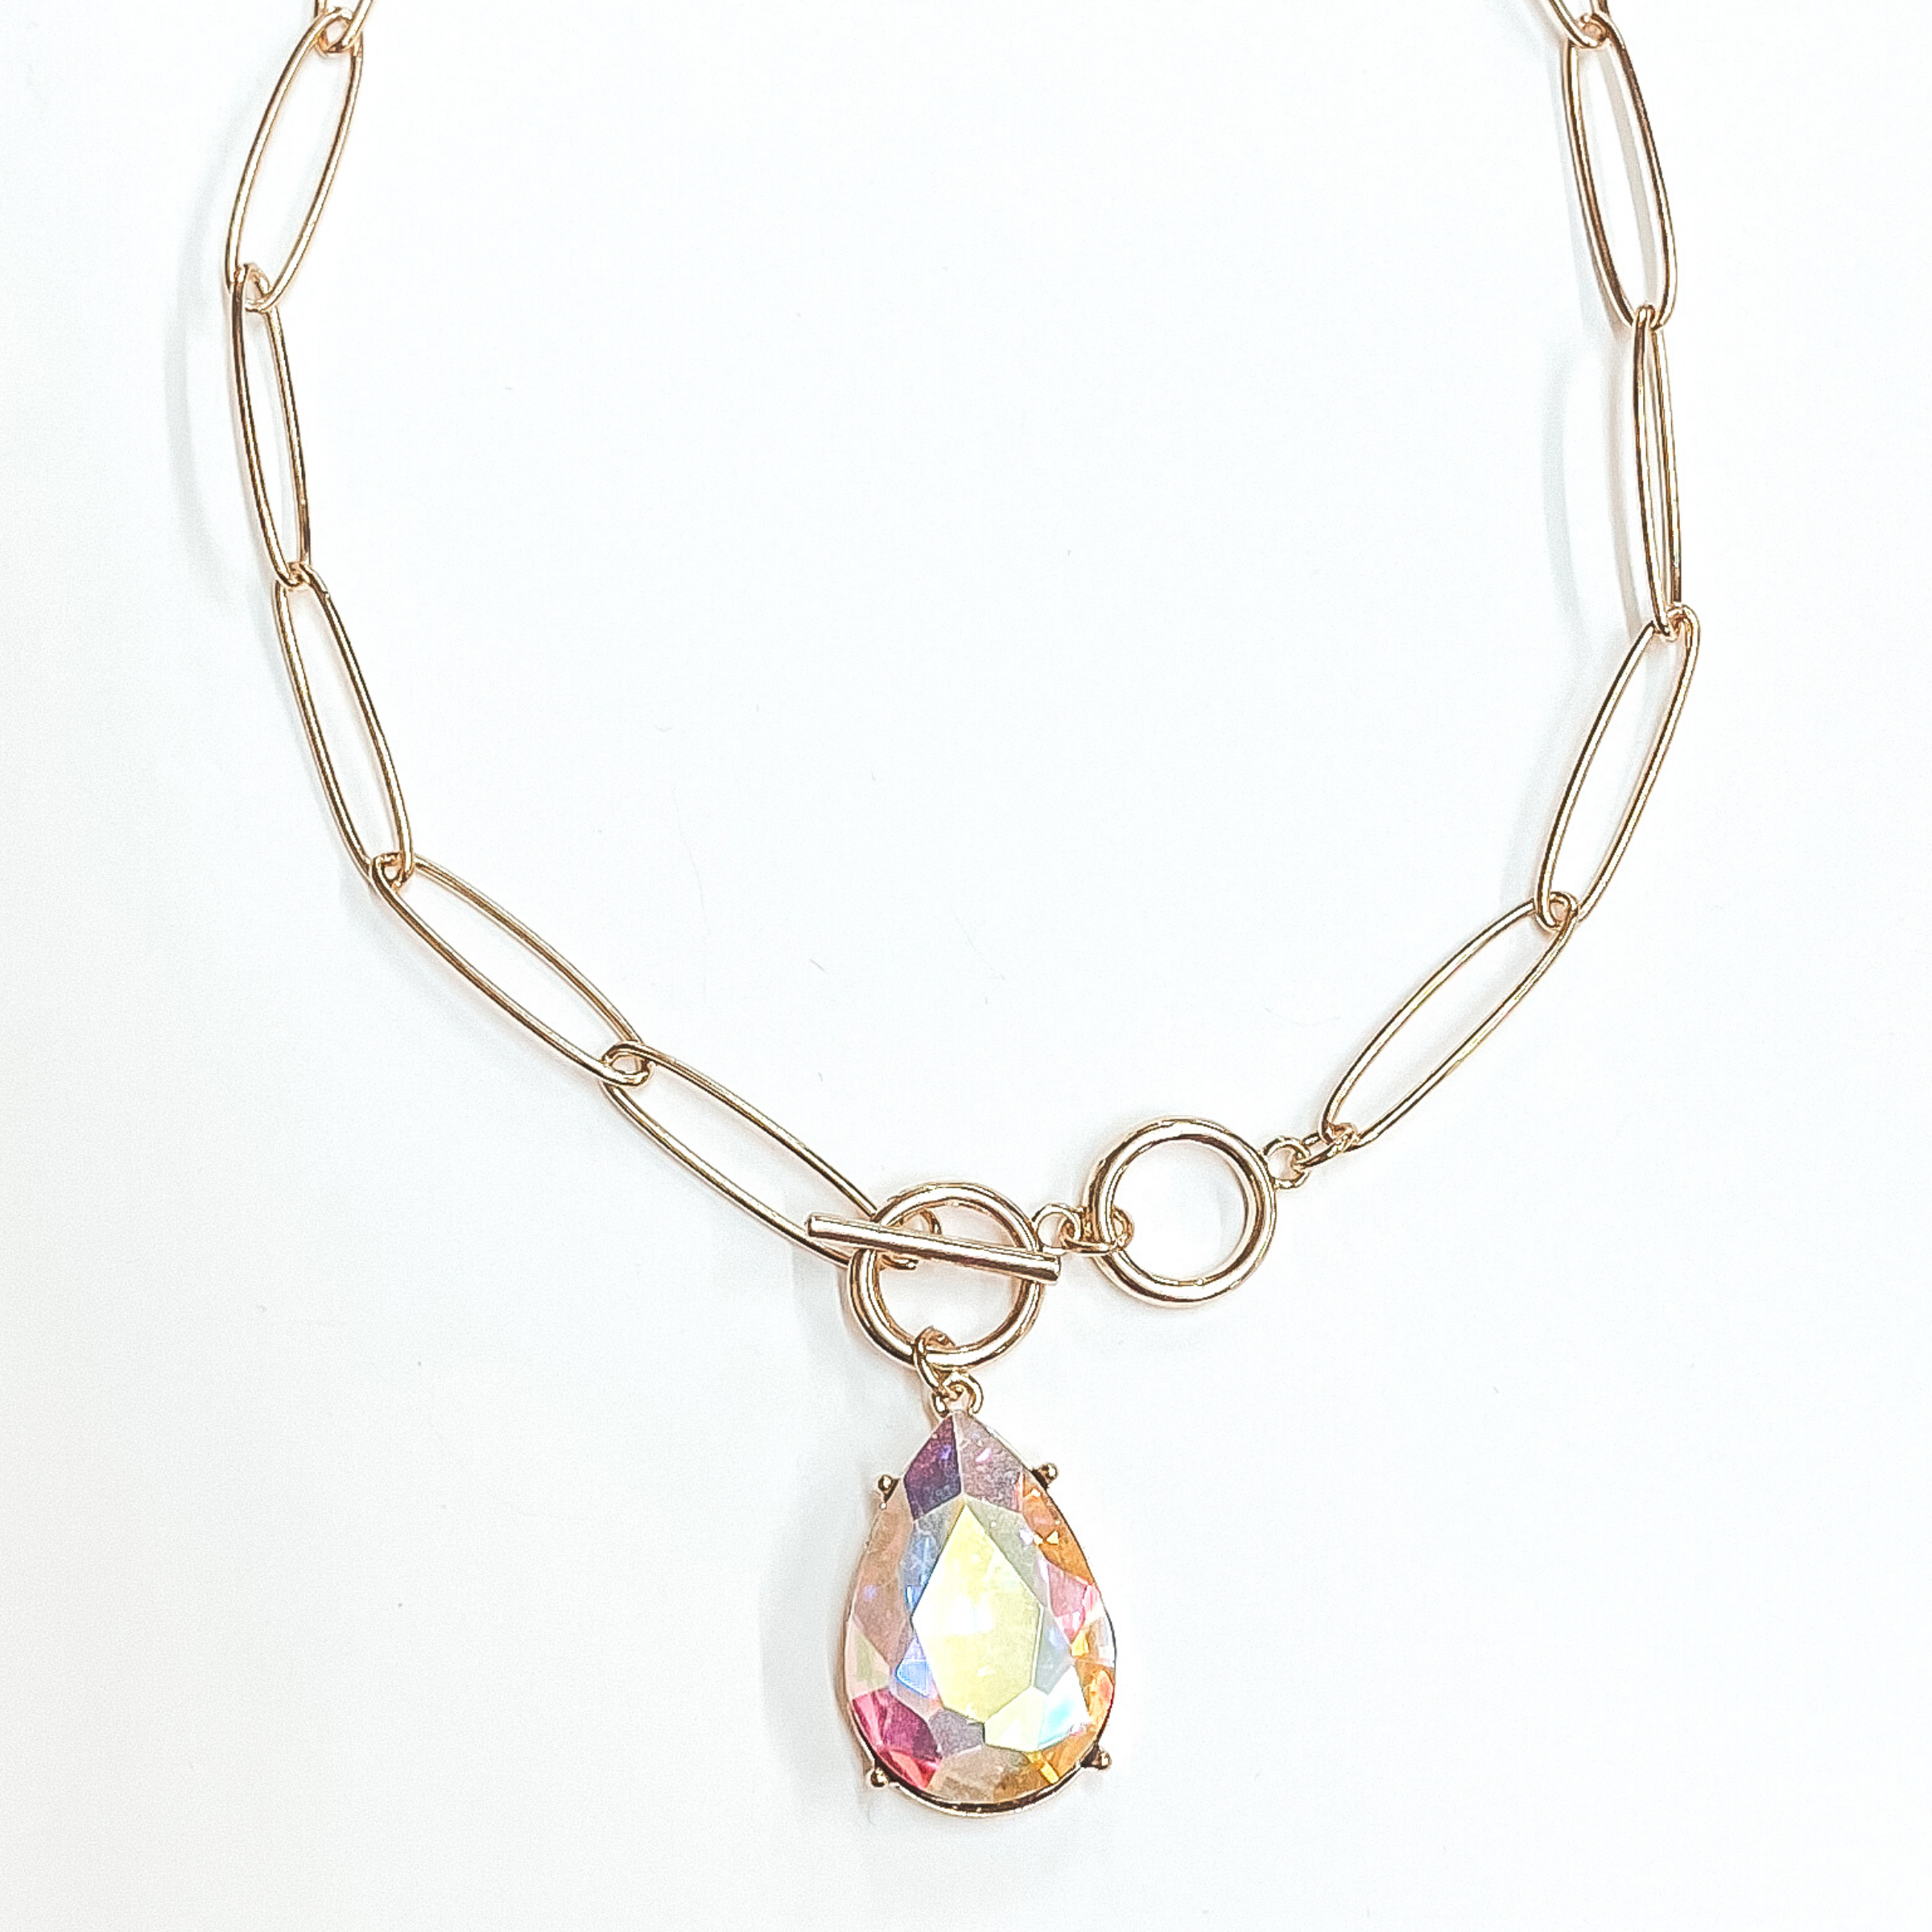 Gold, thin chain necklace with front toggle clasp. This necklace includes an AB teardrop crystal. This necklace is pictured on a white background. 